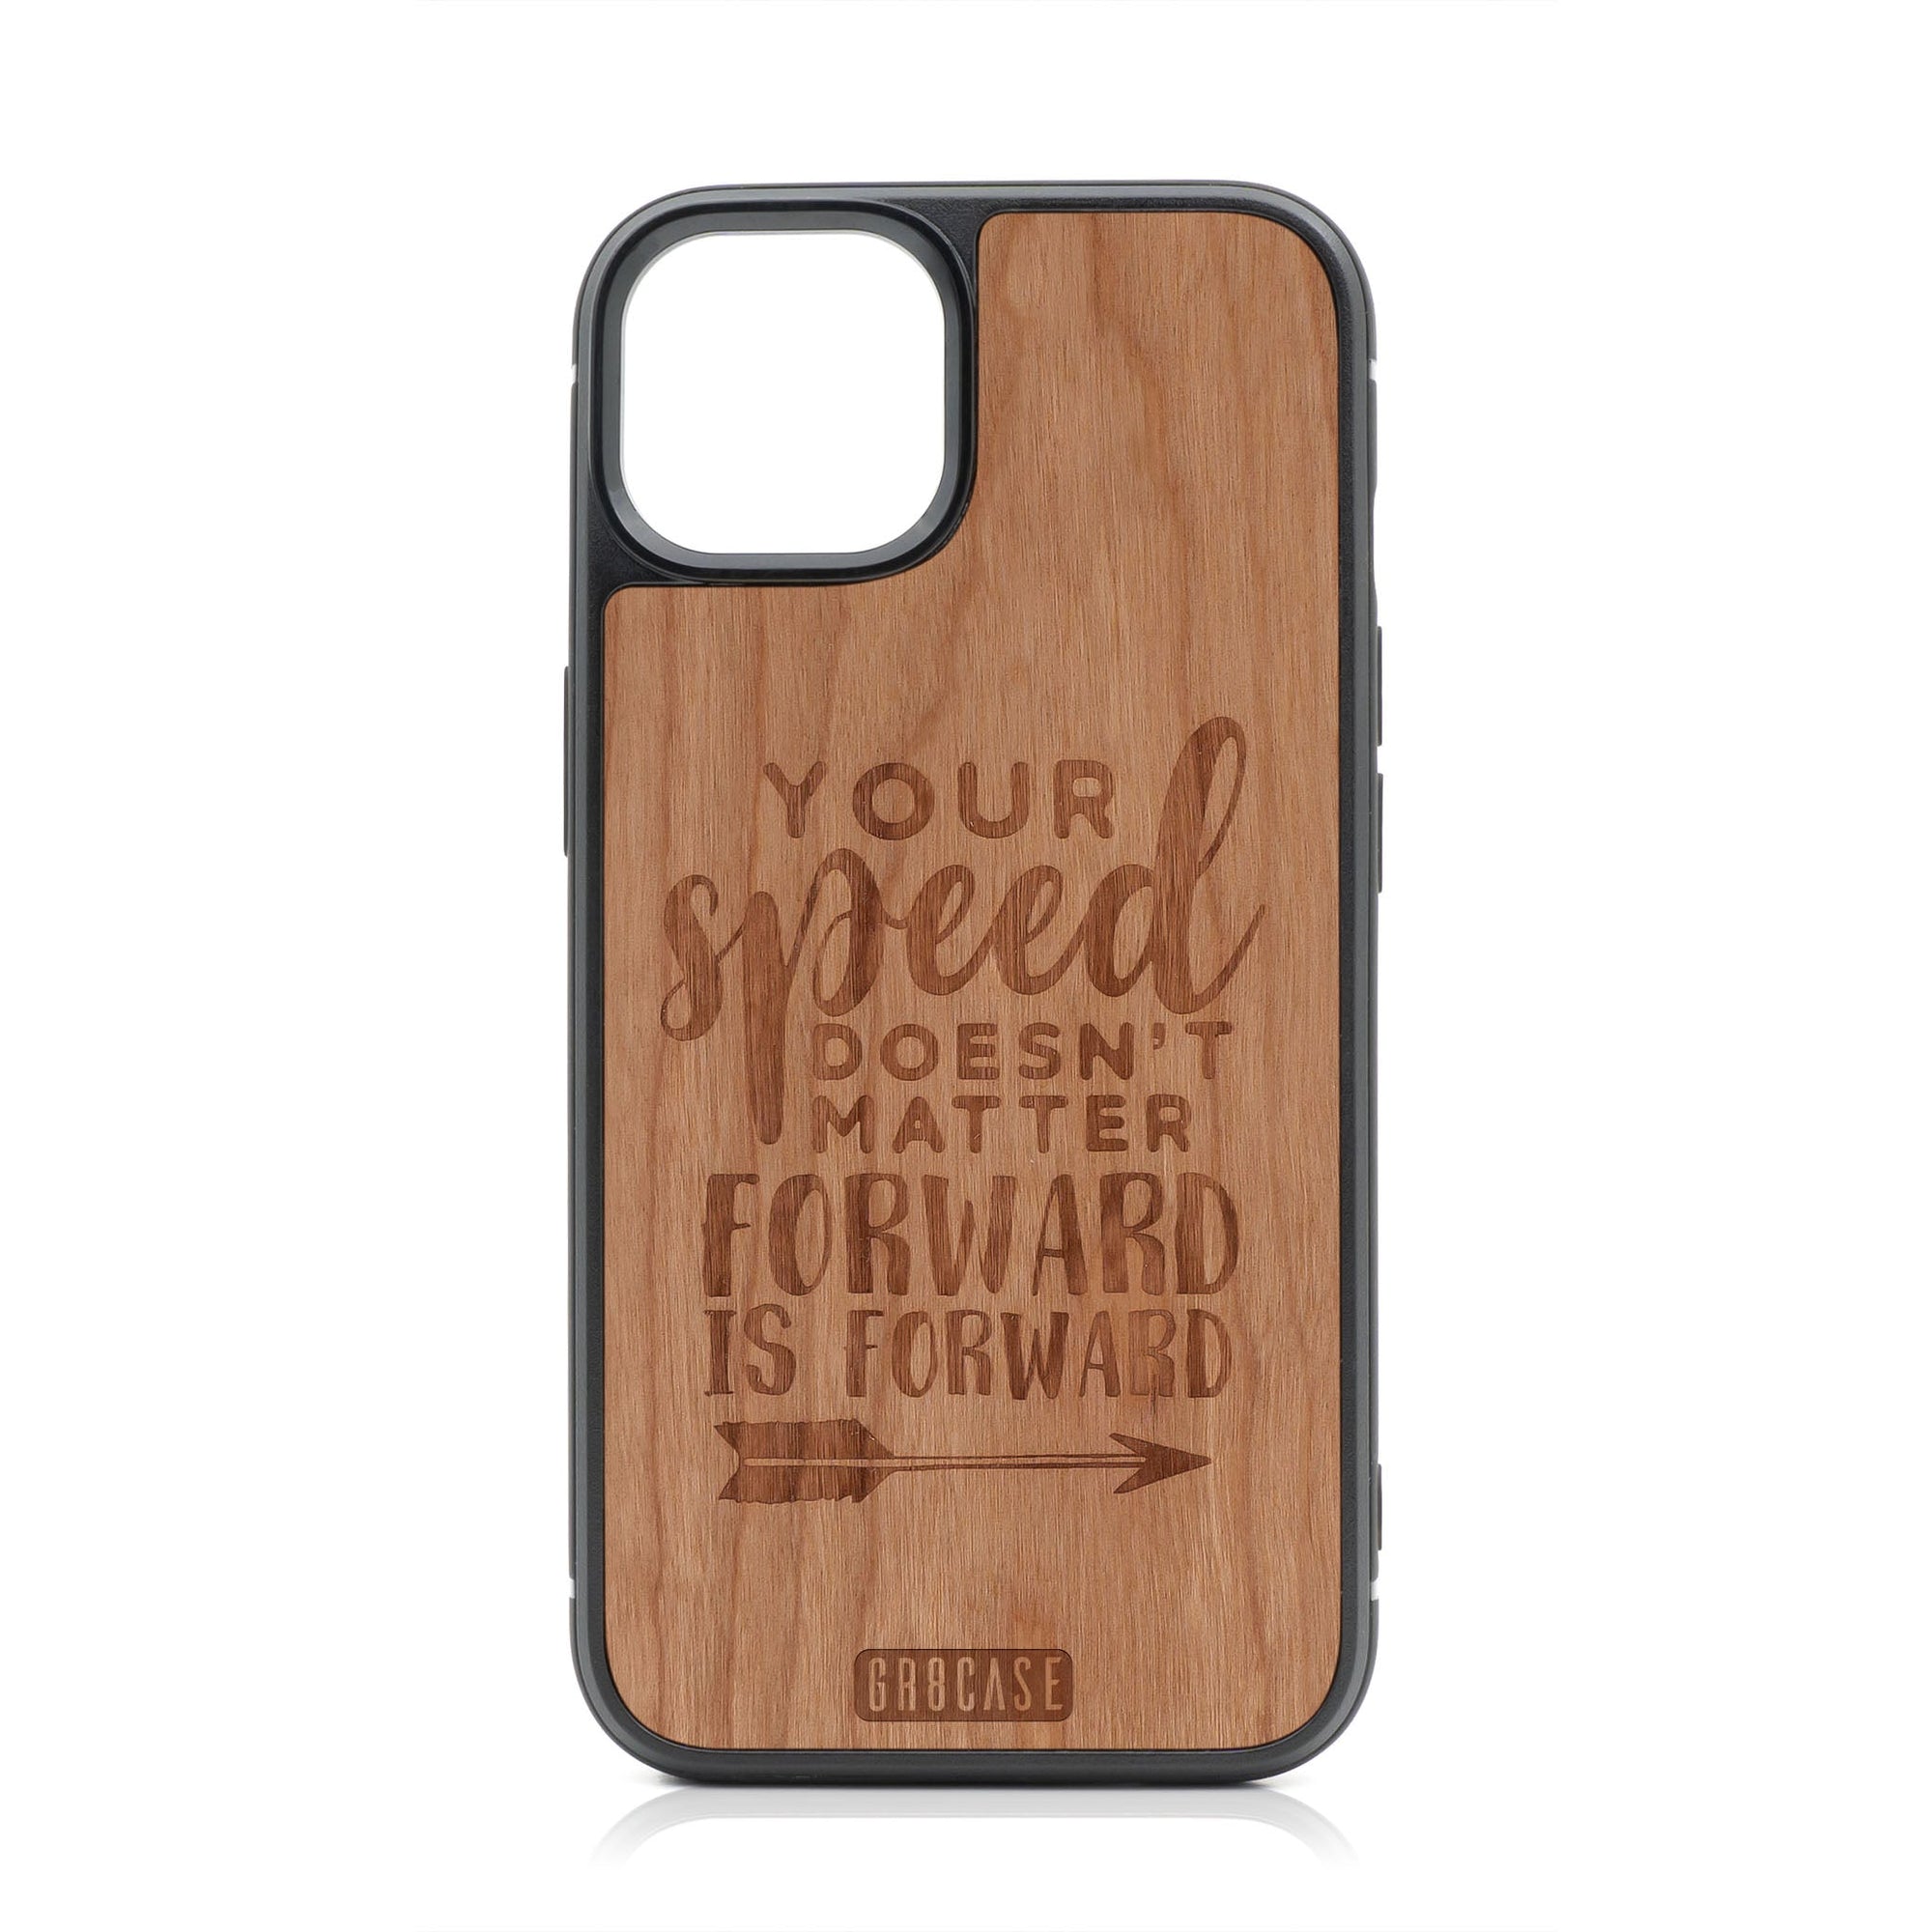 Your Speed Doesn't Matter Forward Is Forward Design Wood Case For iPhone 15